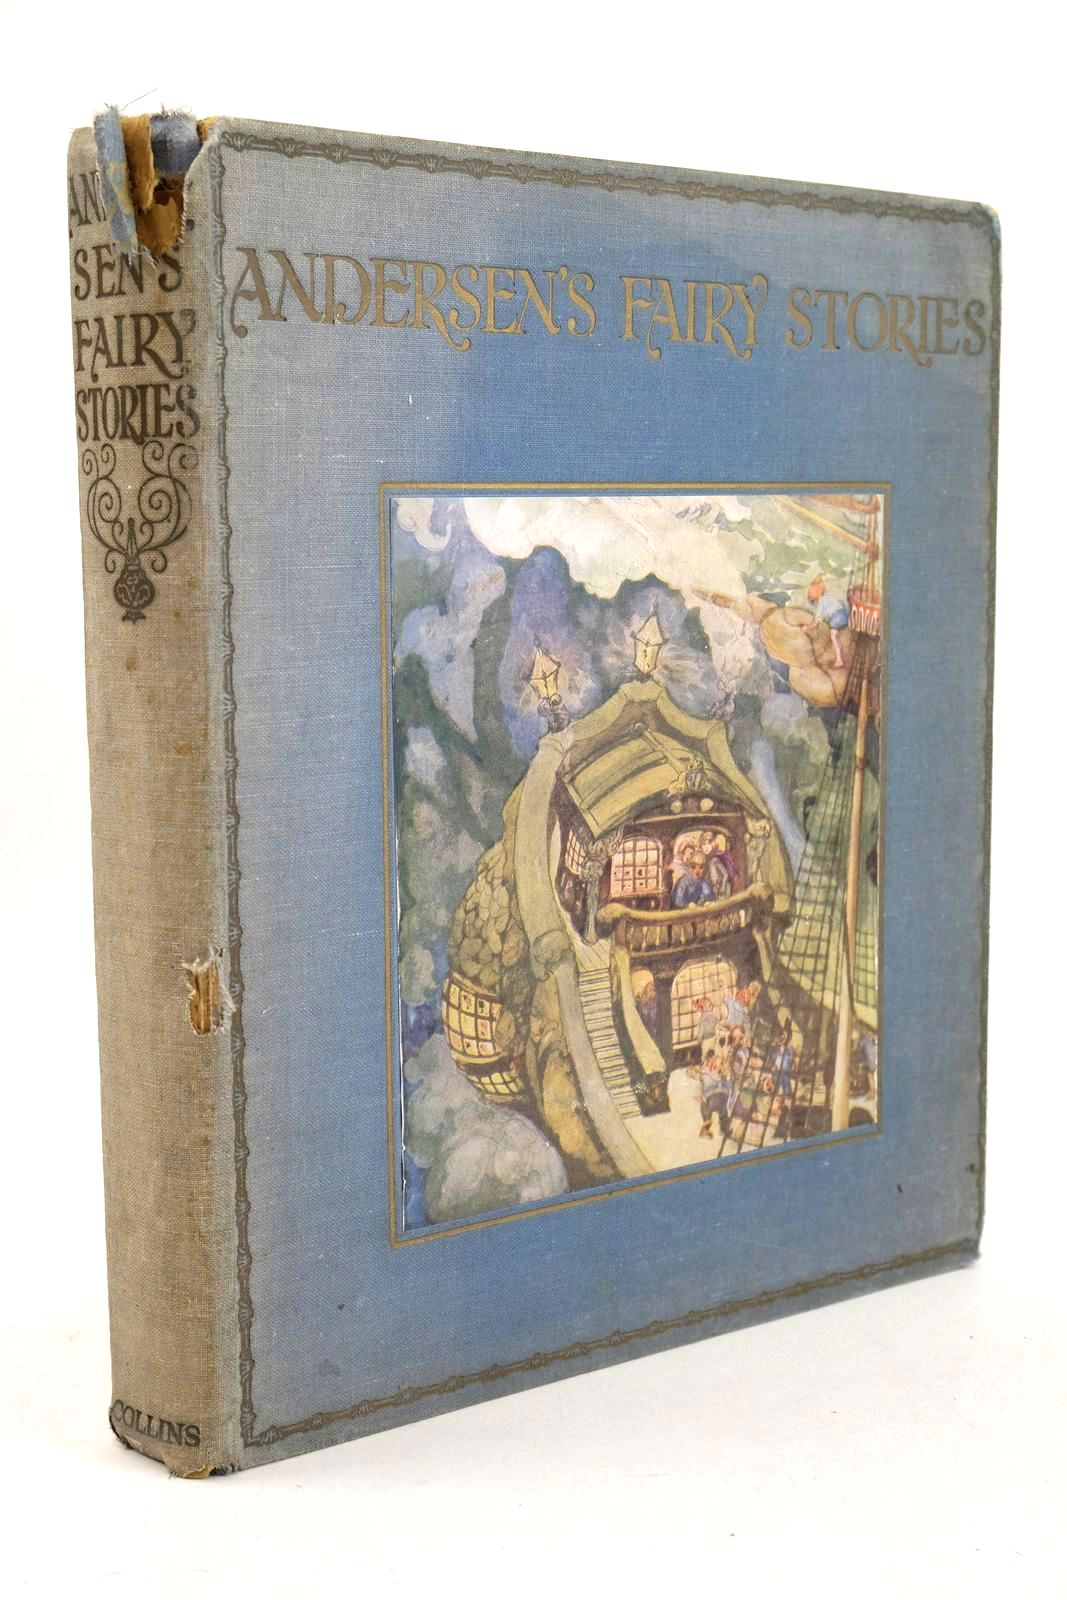 Photo of HANS ANDERSEN'S FAIRY STORIES written by Andersen, Hans Christian illustrated by Anderson, Anne published by Collins Clear-Type Press (STOCK CODE: 1327907)  for sale by Stella & Rose's Books